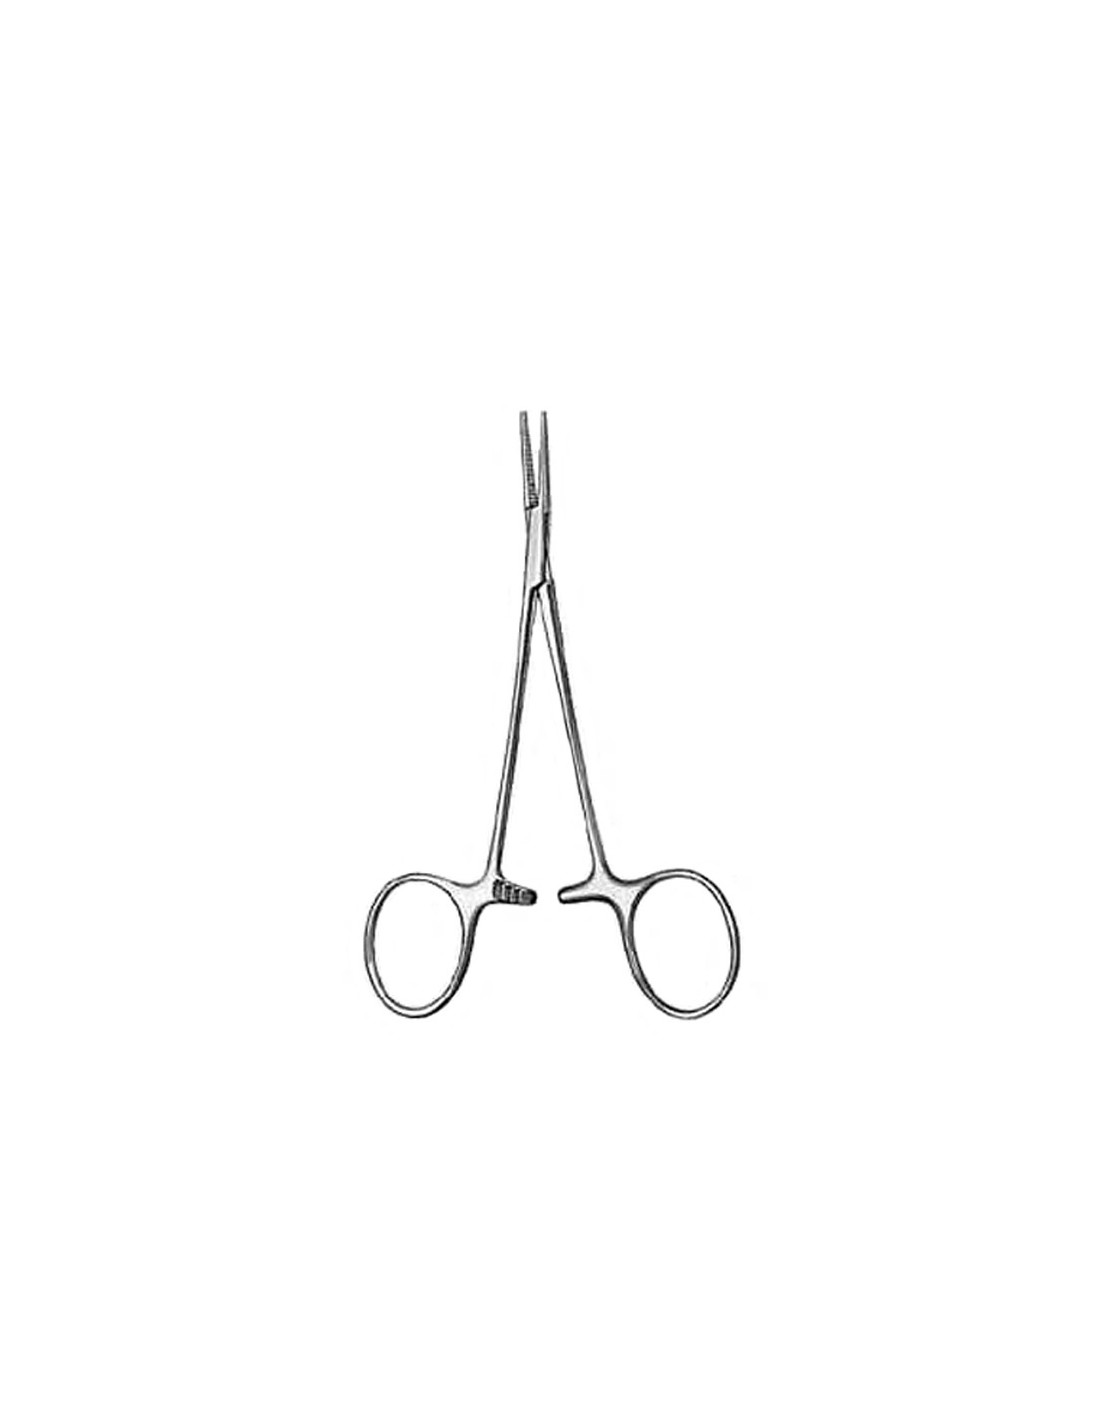 Pinza halsted-mosquito Recta dientes 12,5 cm. | Iberomed